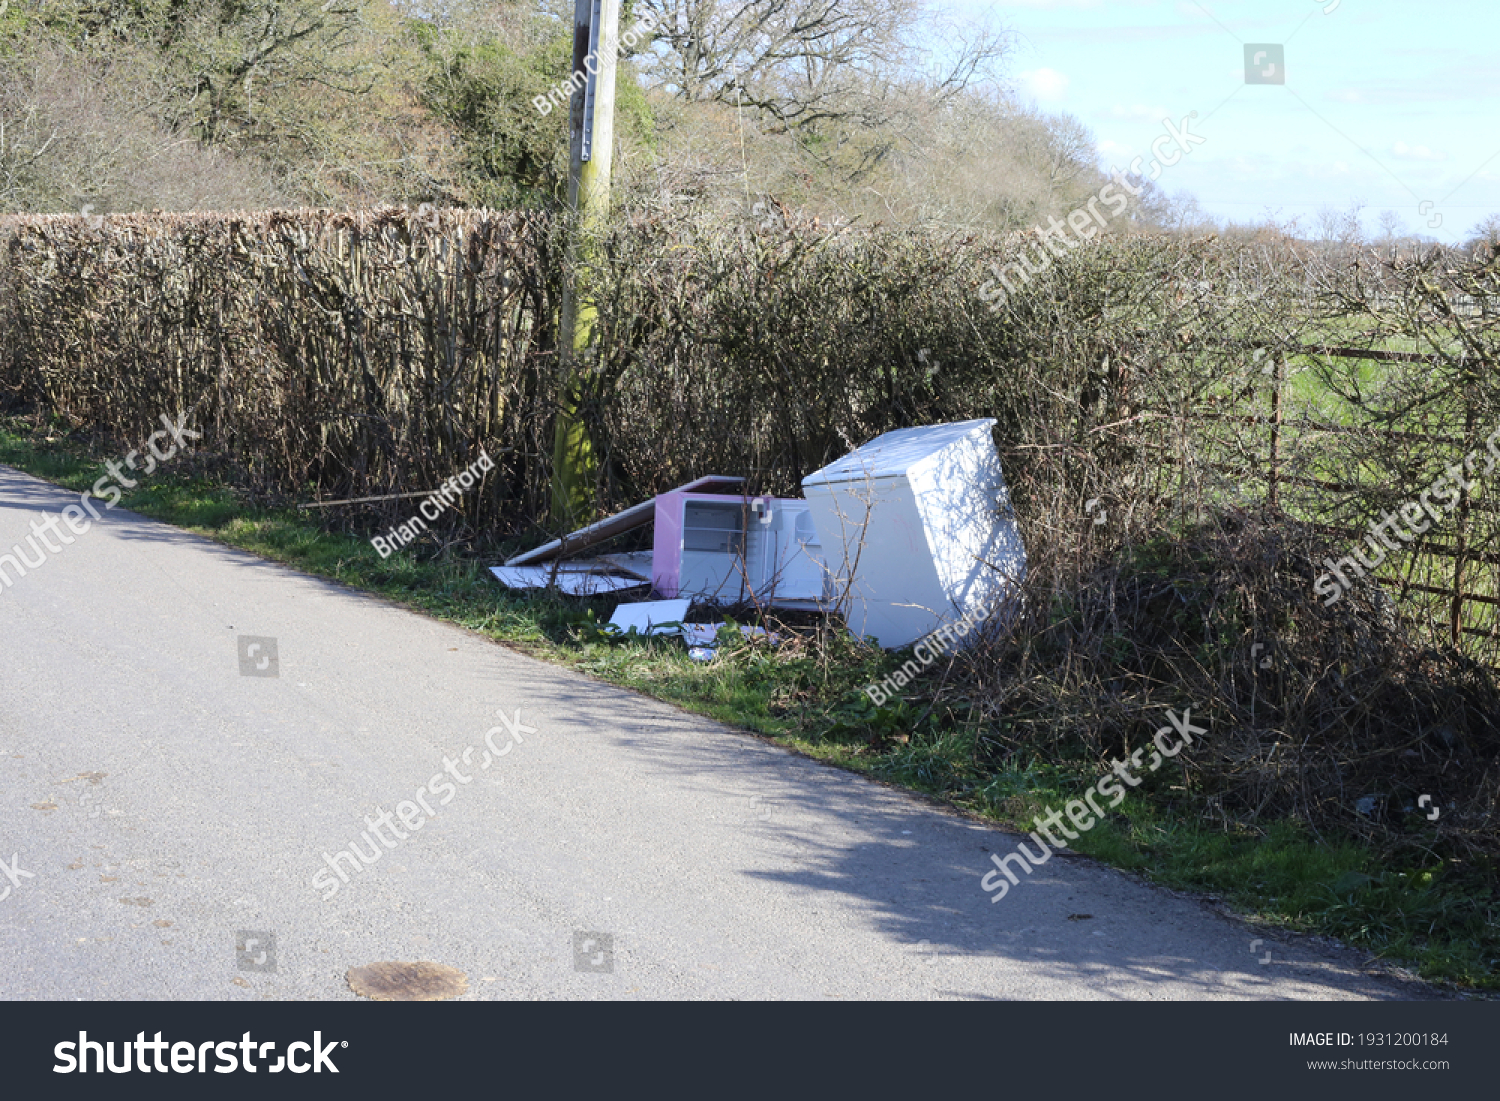 Fly tipped rubbish on a country lane #1931200184